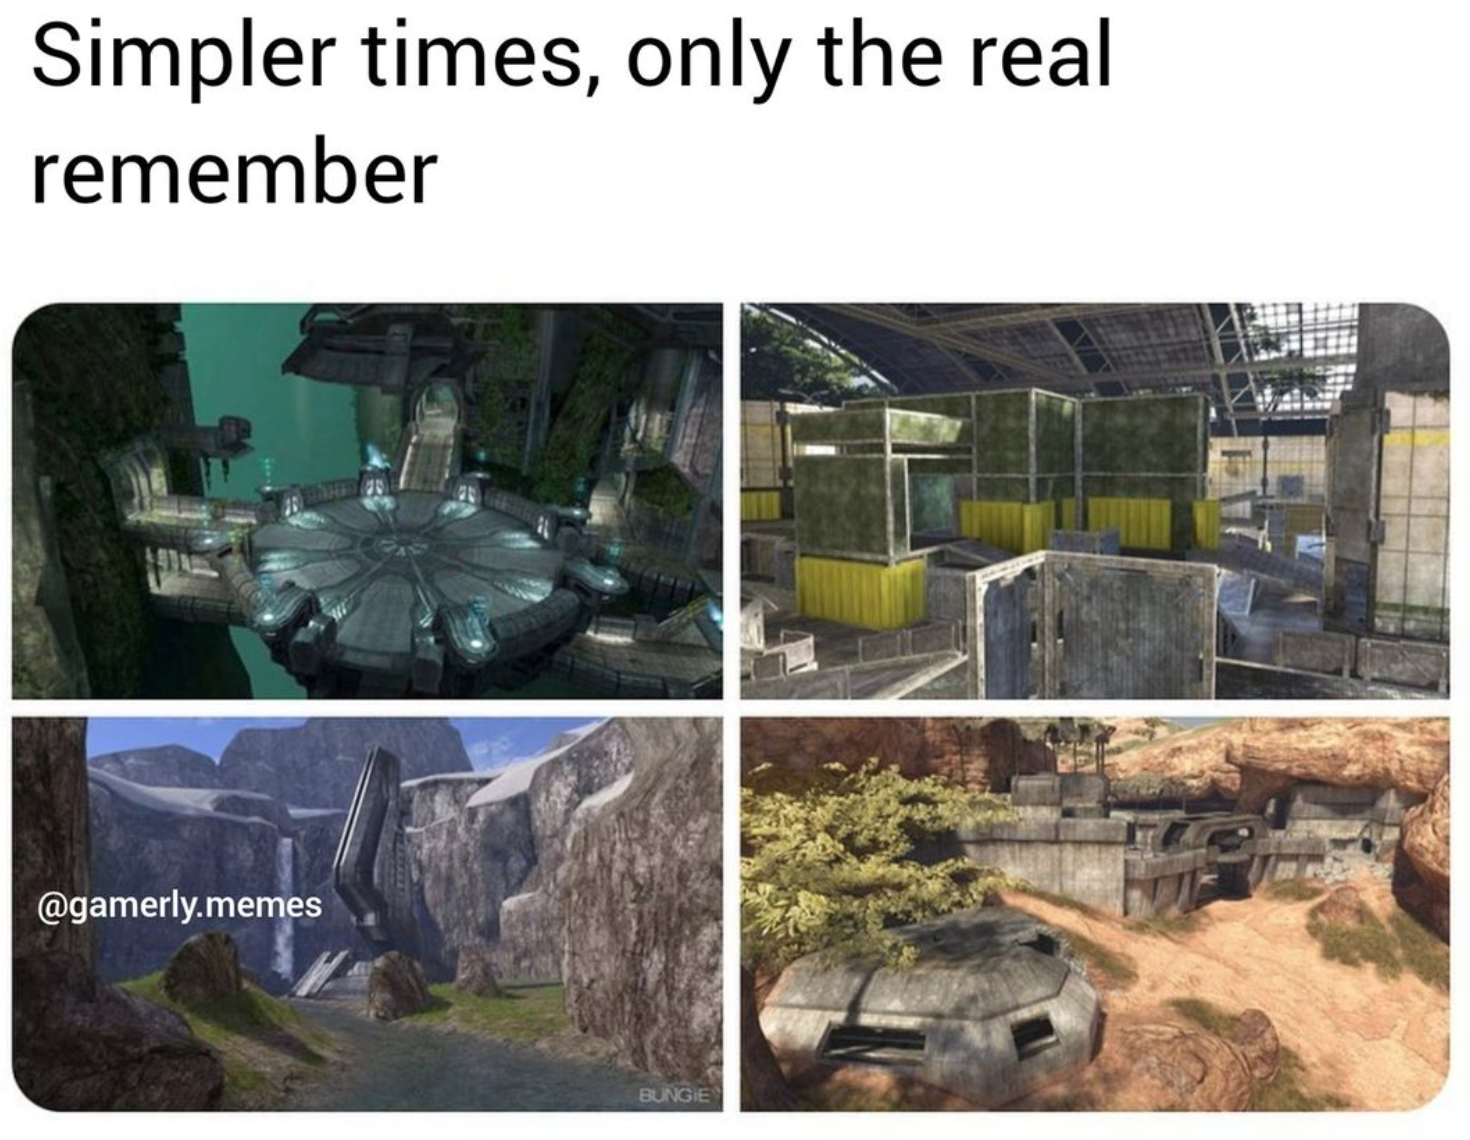 funny gaming memes - spielwarenmesse - Simpler times, only the real remember 92 .memes